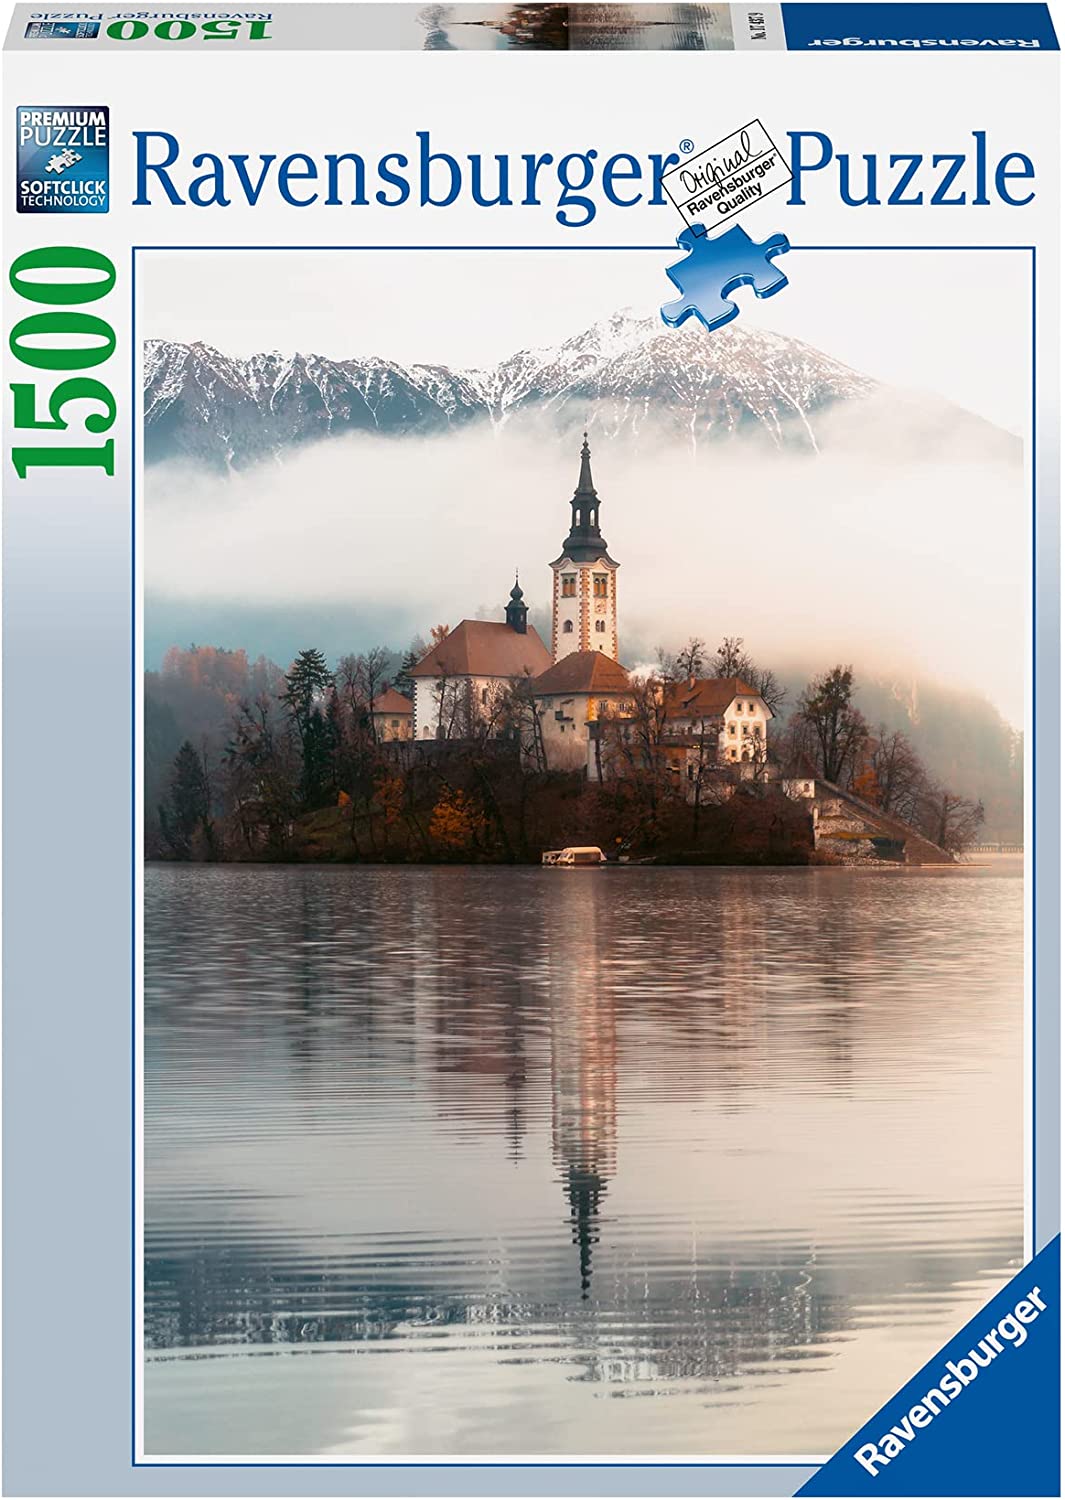 RAVENSBURGER 17437 9 THE ISLAND OF WISHES BLED, SLOVENIA 1000 PIECE PUZZLE